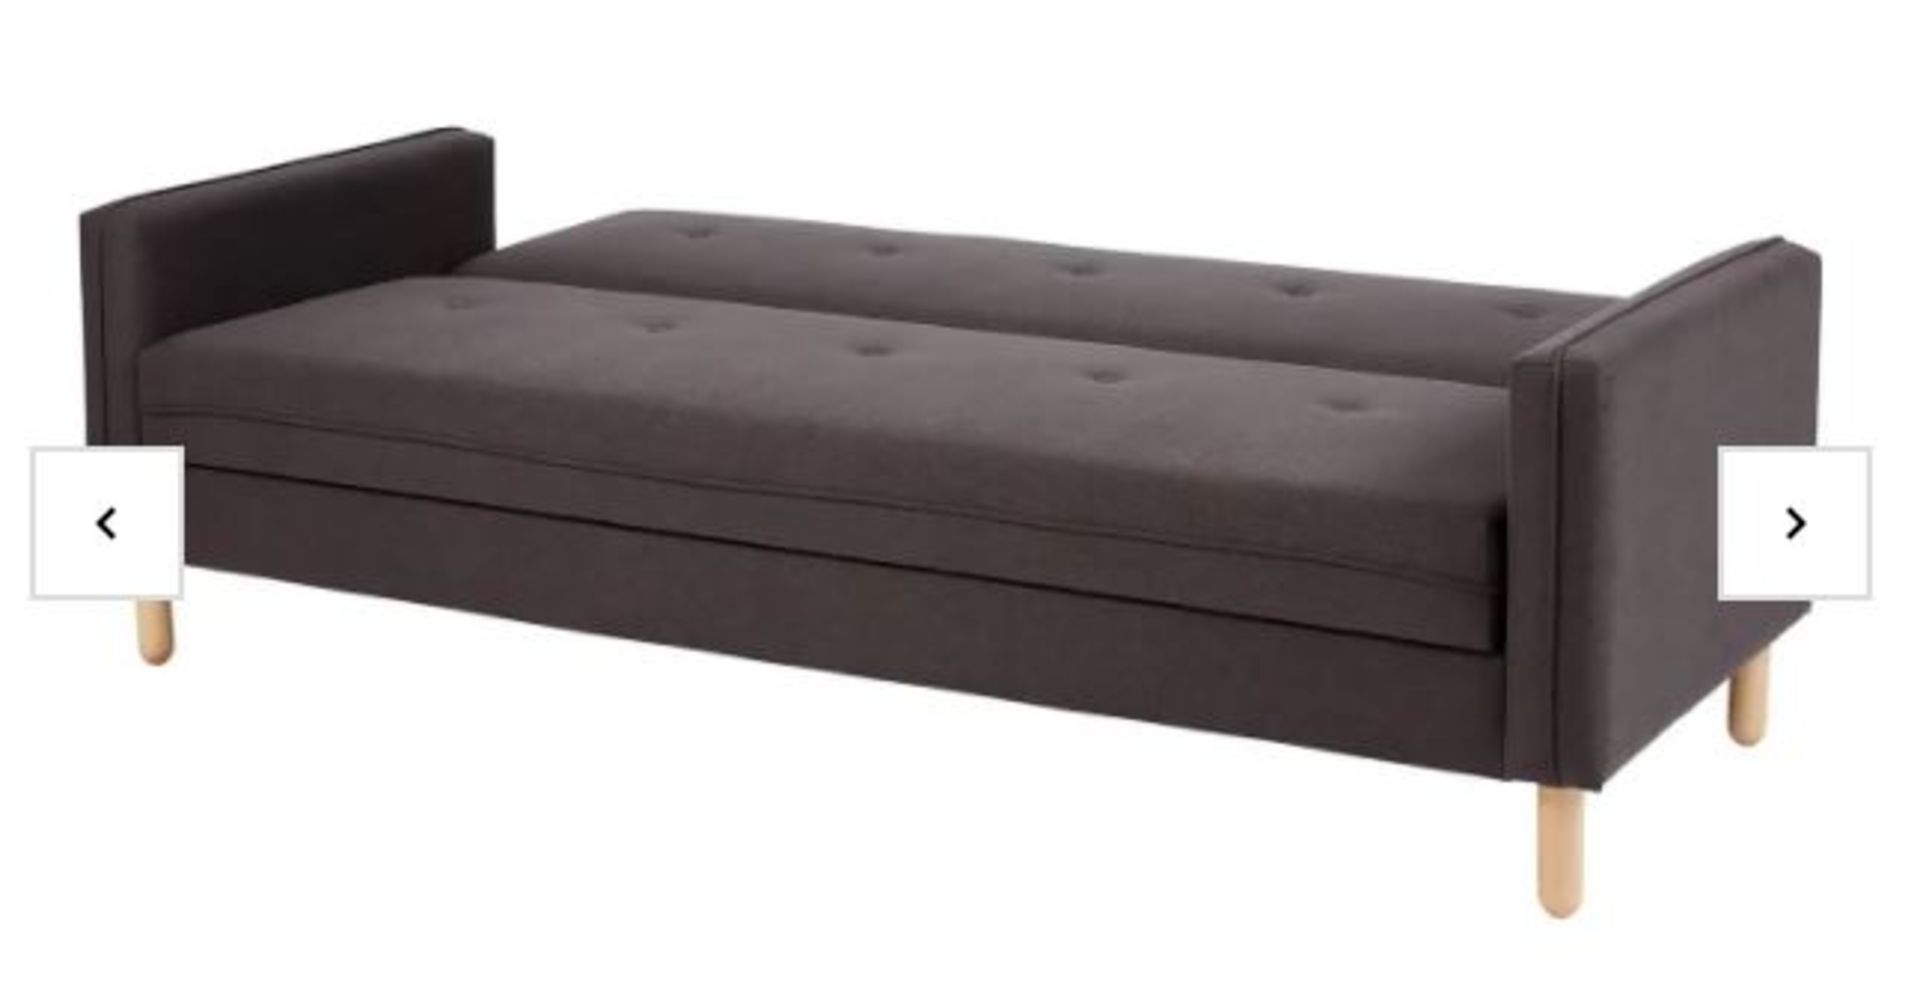 (P4) 1x Sindy Sofa Bed With Storage Charcoal RRP £300. (Sofa: H85x W200x D84cm). (Bed: H44x W200x D - Image 2 of 7